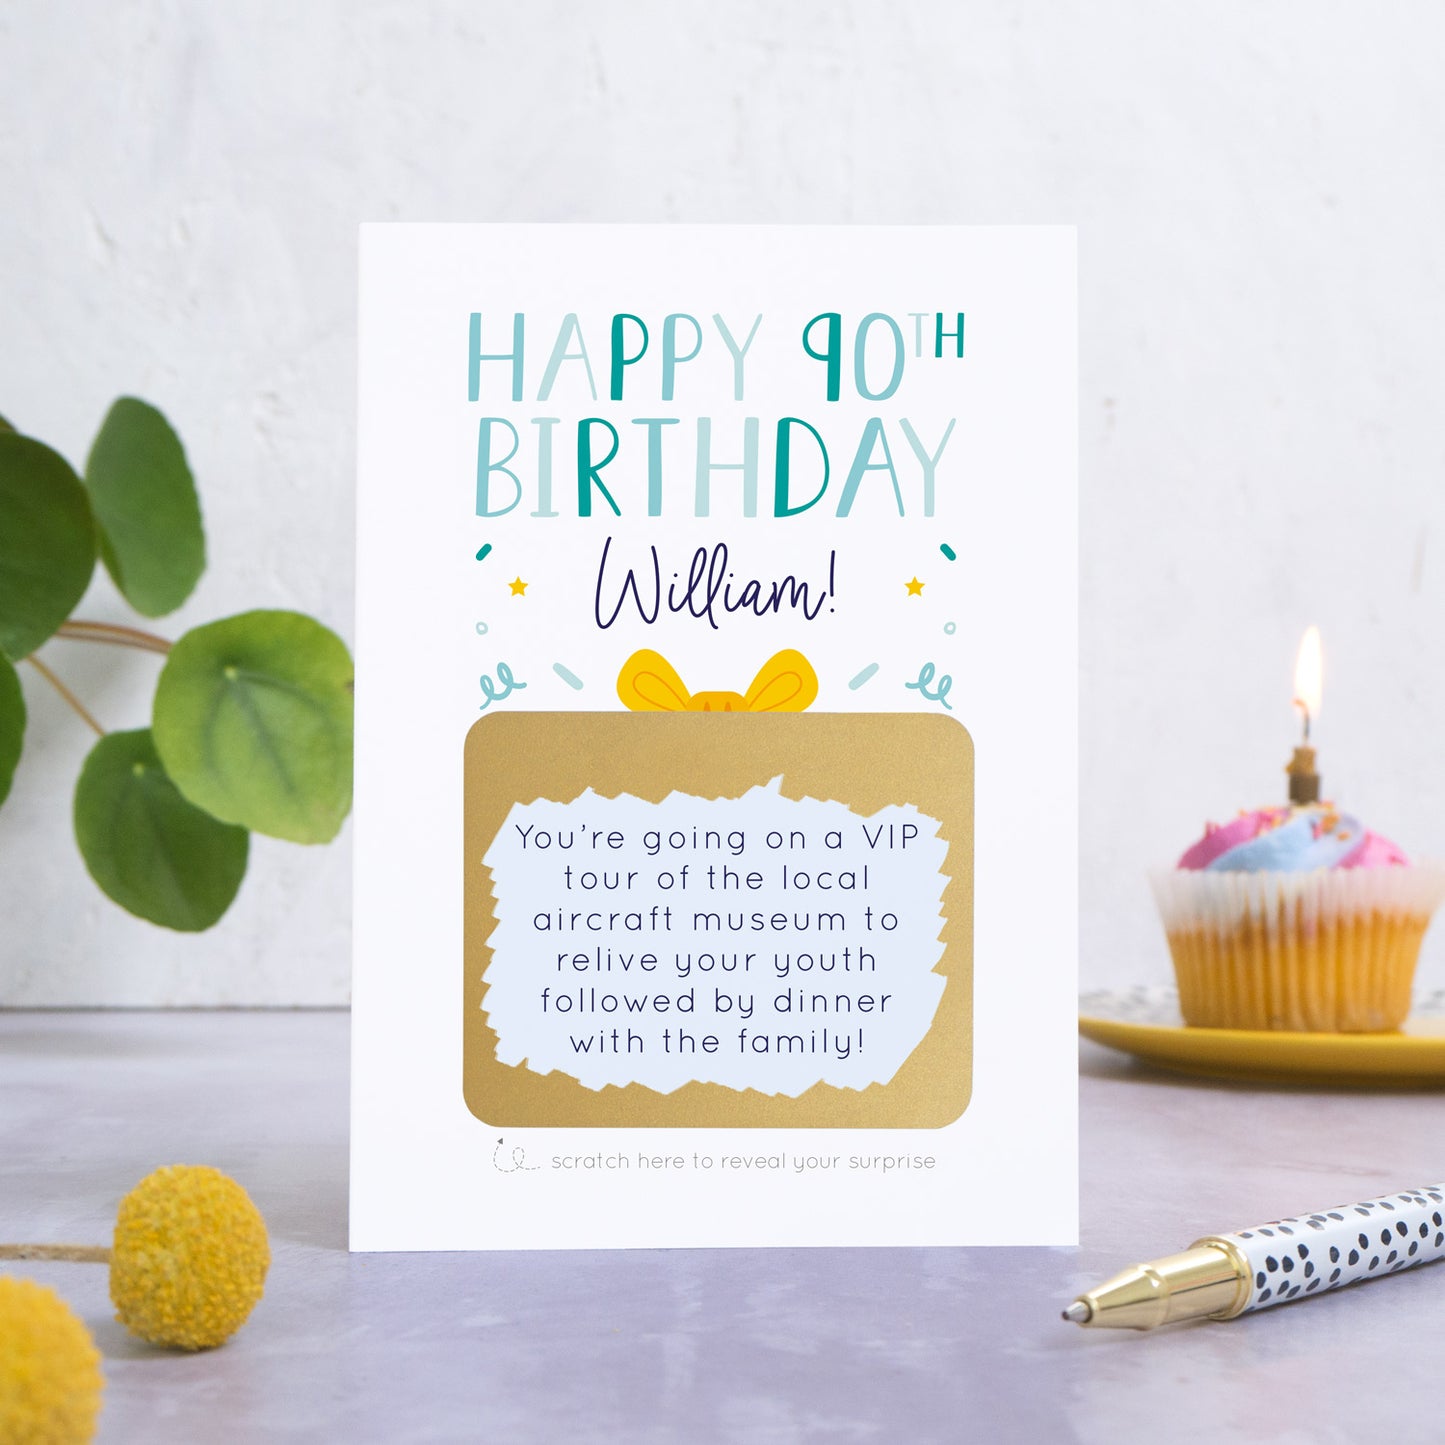 A personalised happy 90th birthday scratch card in blue that has been photographed on a white and grey background. There is foliage and yellow flowers on the left and a cupcake and a pen to the right. The card features the recipients name and a scratch panel that has been scratched off revealing a personalised message.